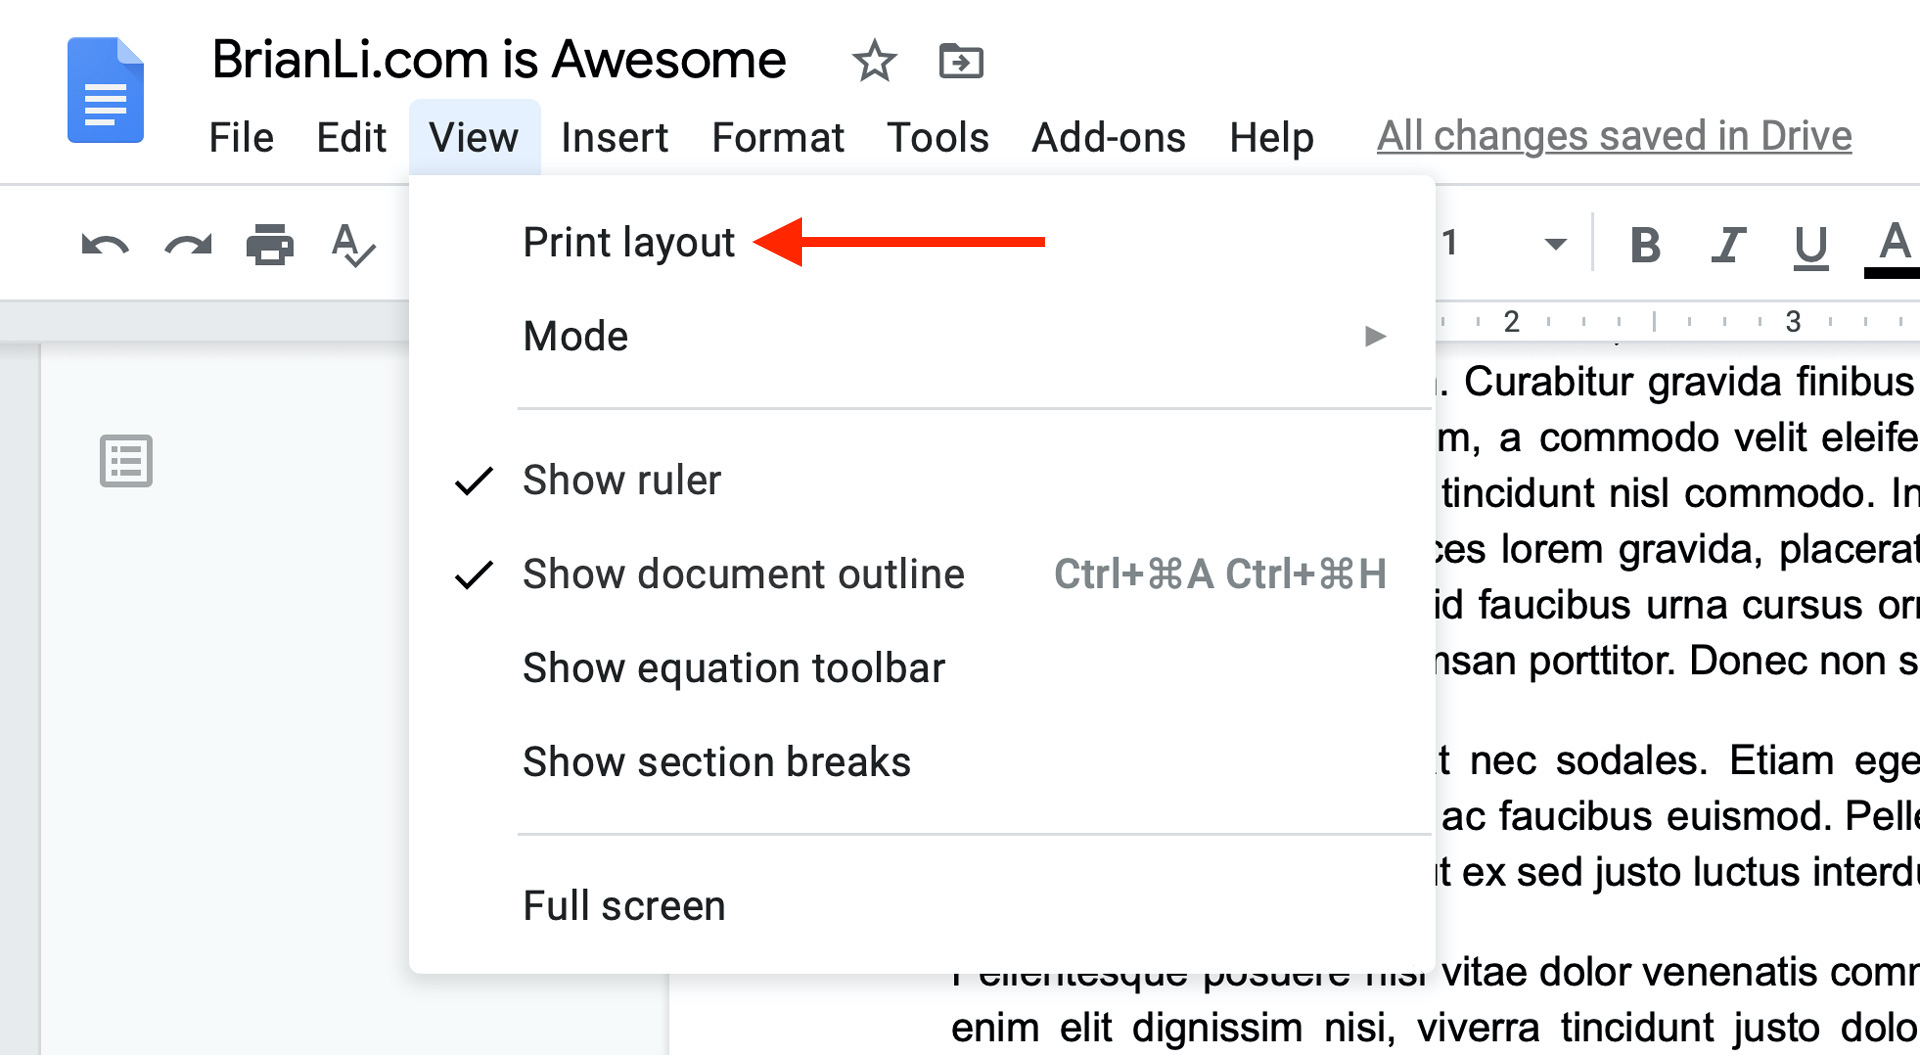 Turn off the print layout feature in Google Docs to remove page breaks.